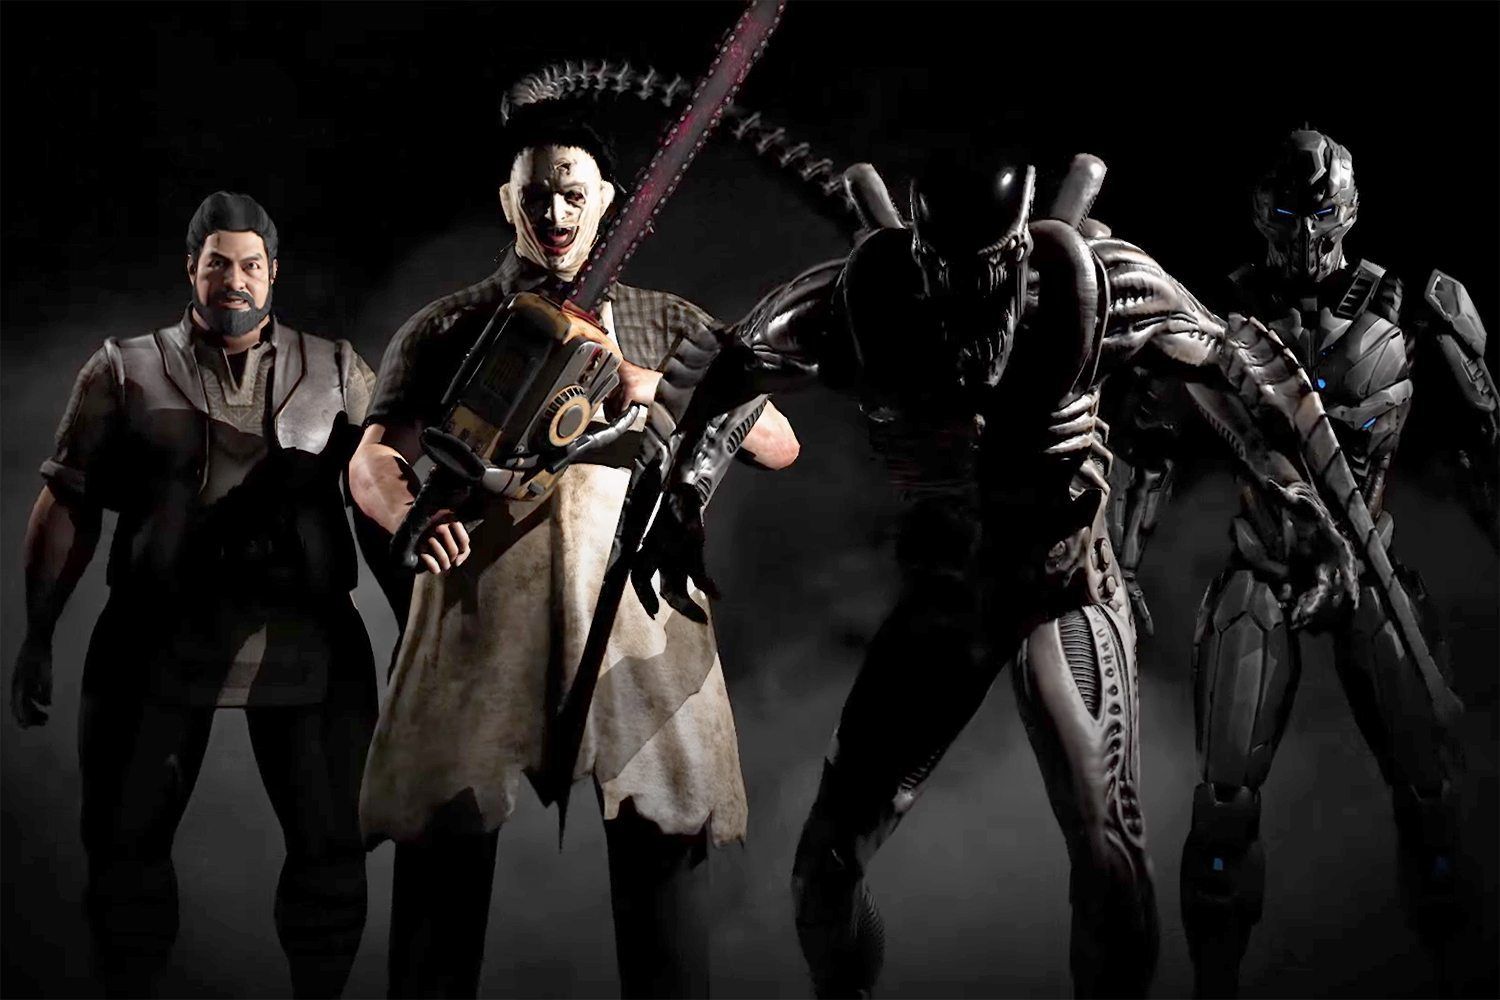 Mortal Kombat X strayed from the series humorous tone, but embraced a darker atmosphere.